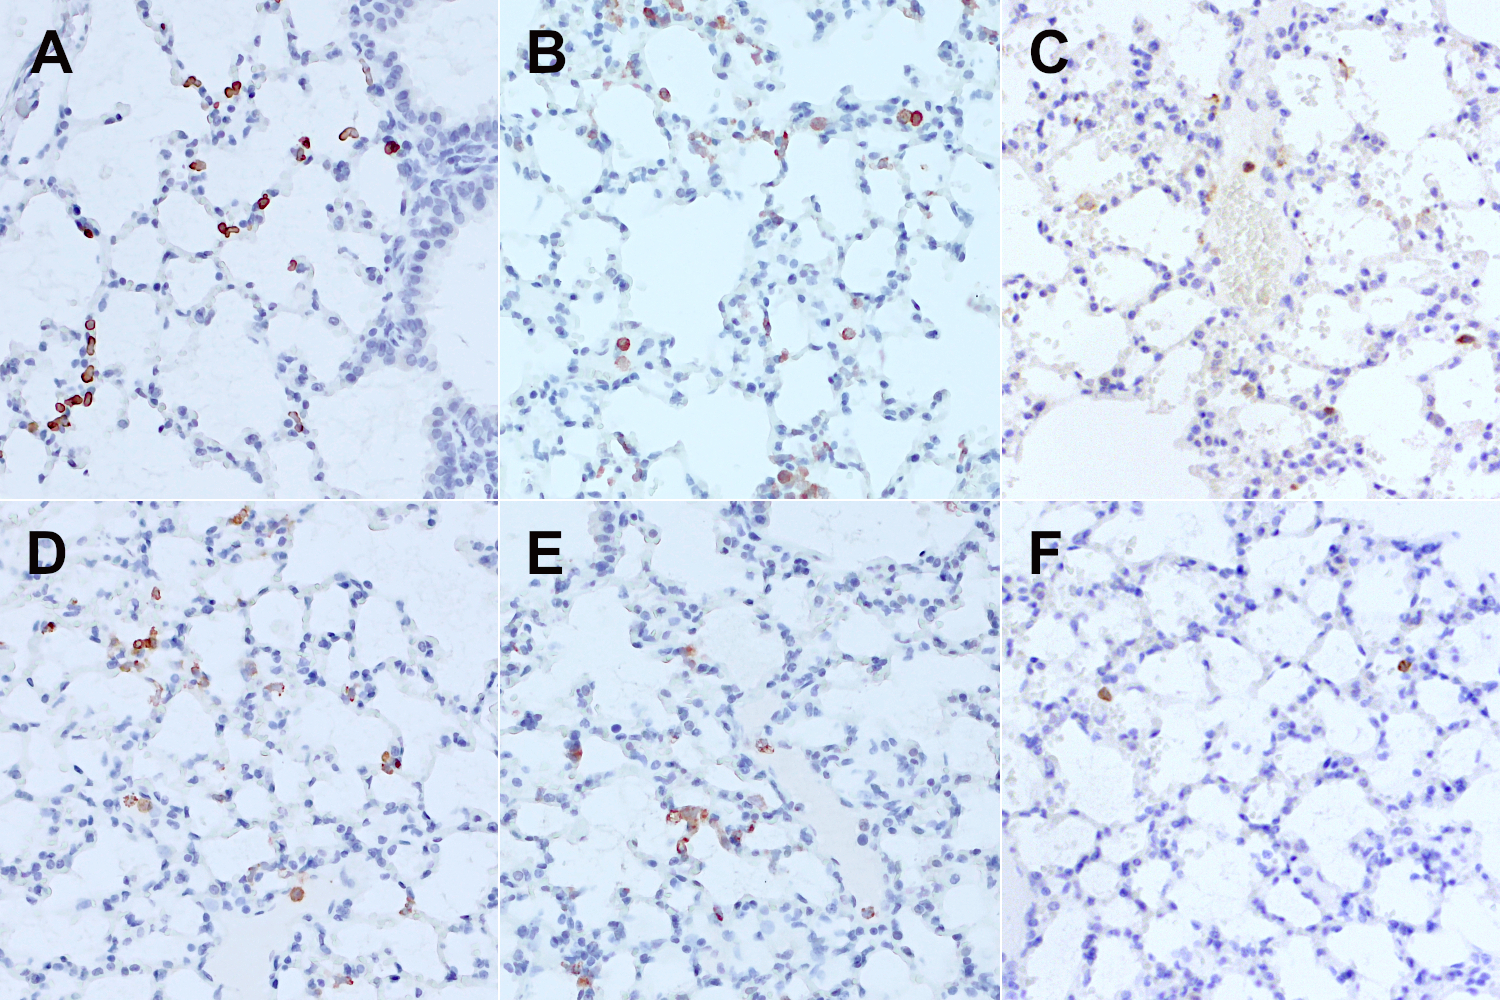 Immunohistochemical staining of formalin fixed paraffin embedded sections of a humanized mouse lung 